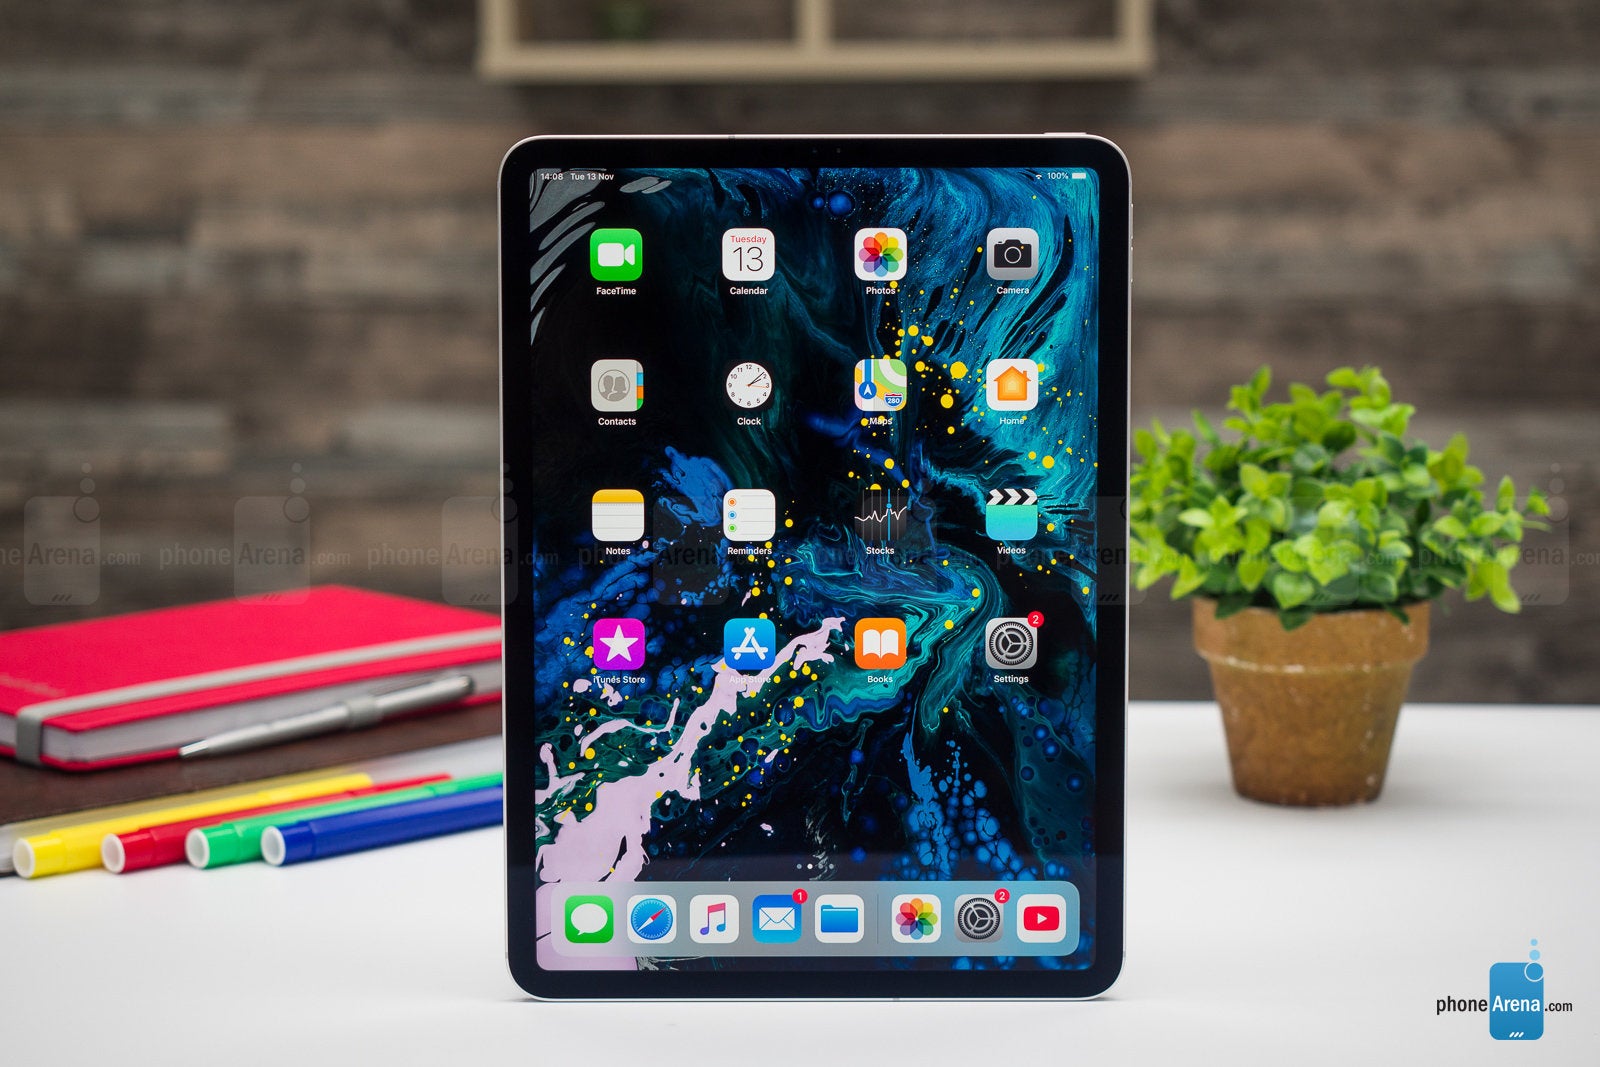 The iPad is like an unfolded phone, but better. - Will Apple release a foldable iPhone?